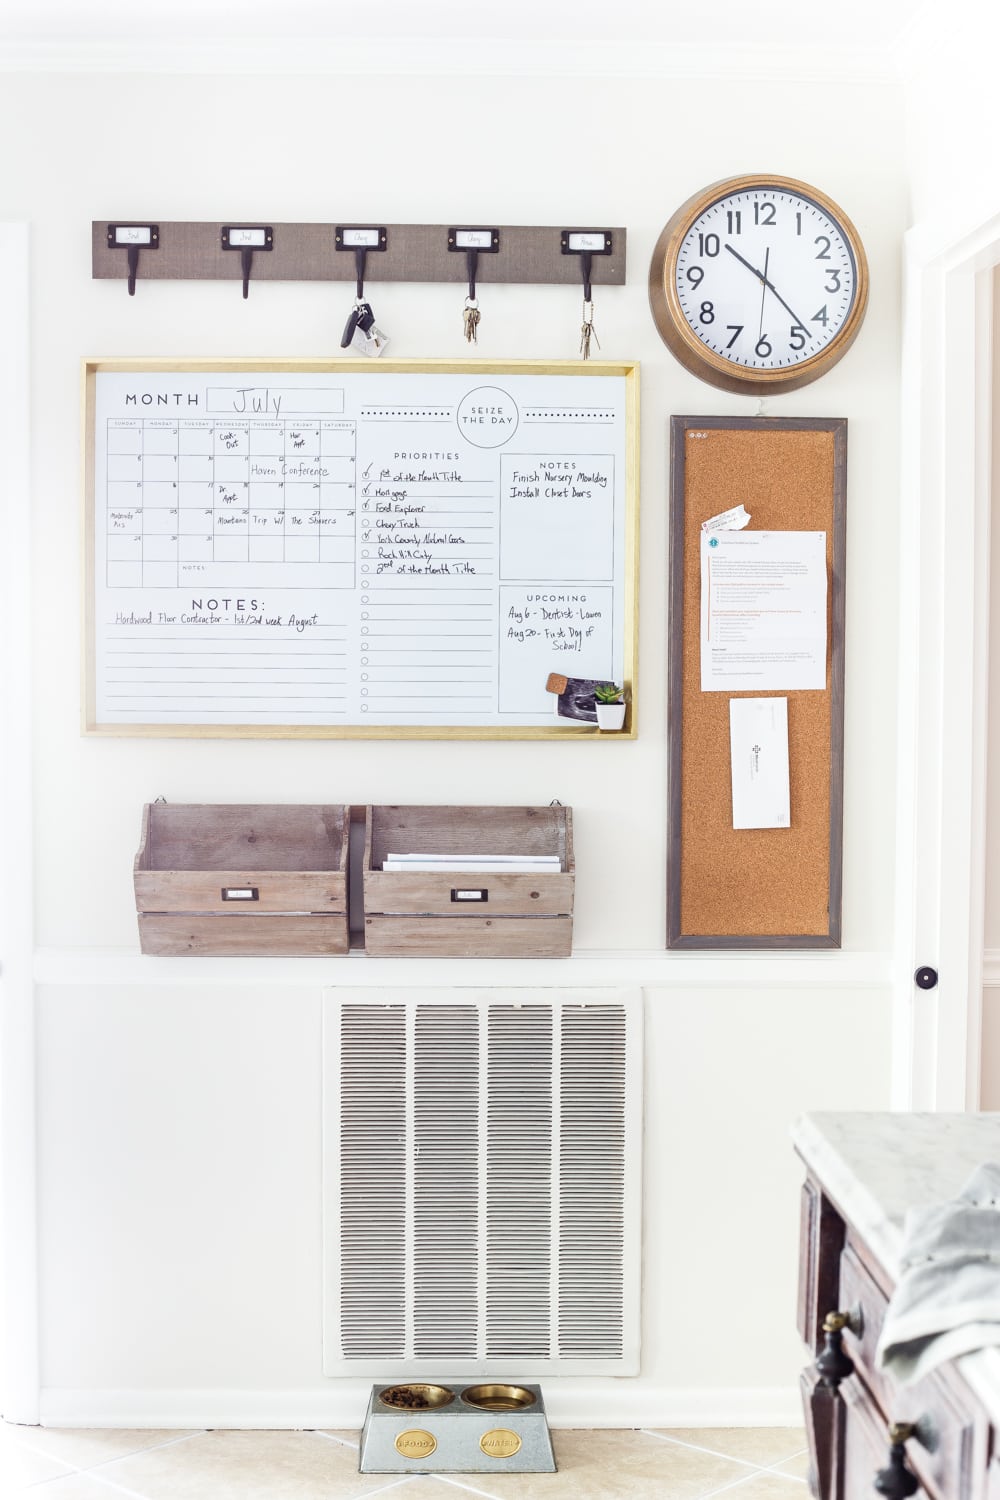 Large whiteboard calender, key hooks, clock, bulletin board and wooden crates for filing papers